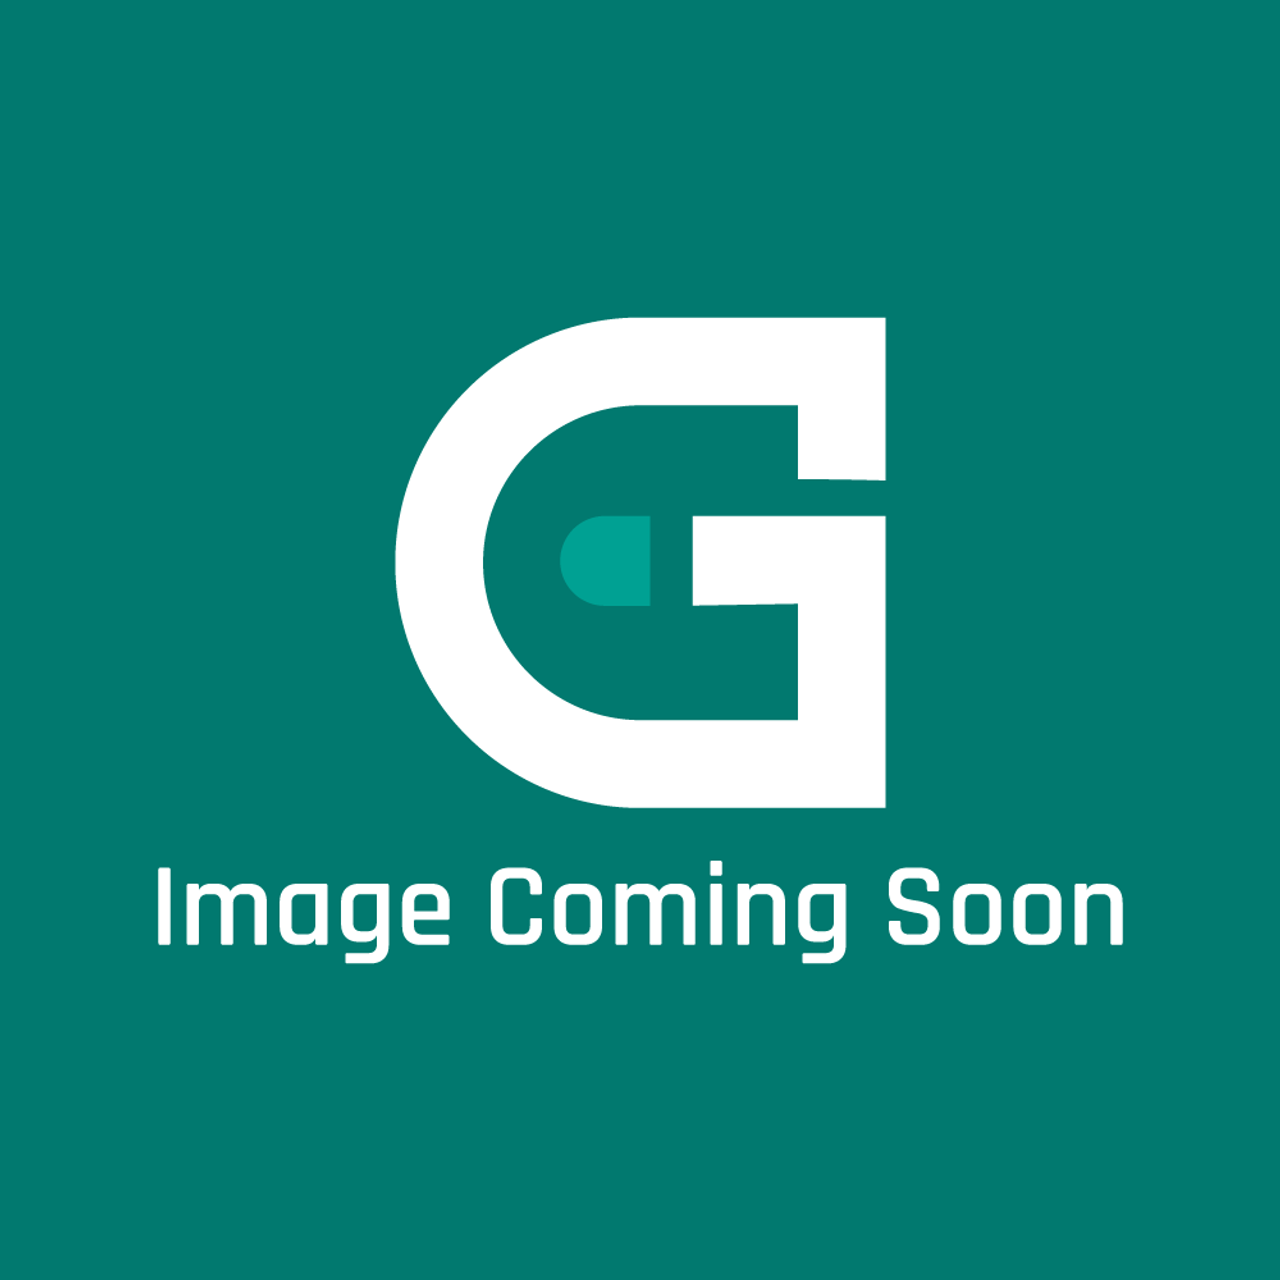 Groen Z088848 - Tube, Cavity Drain Exten Sion - Image Coming Soon!